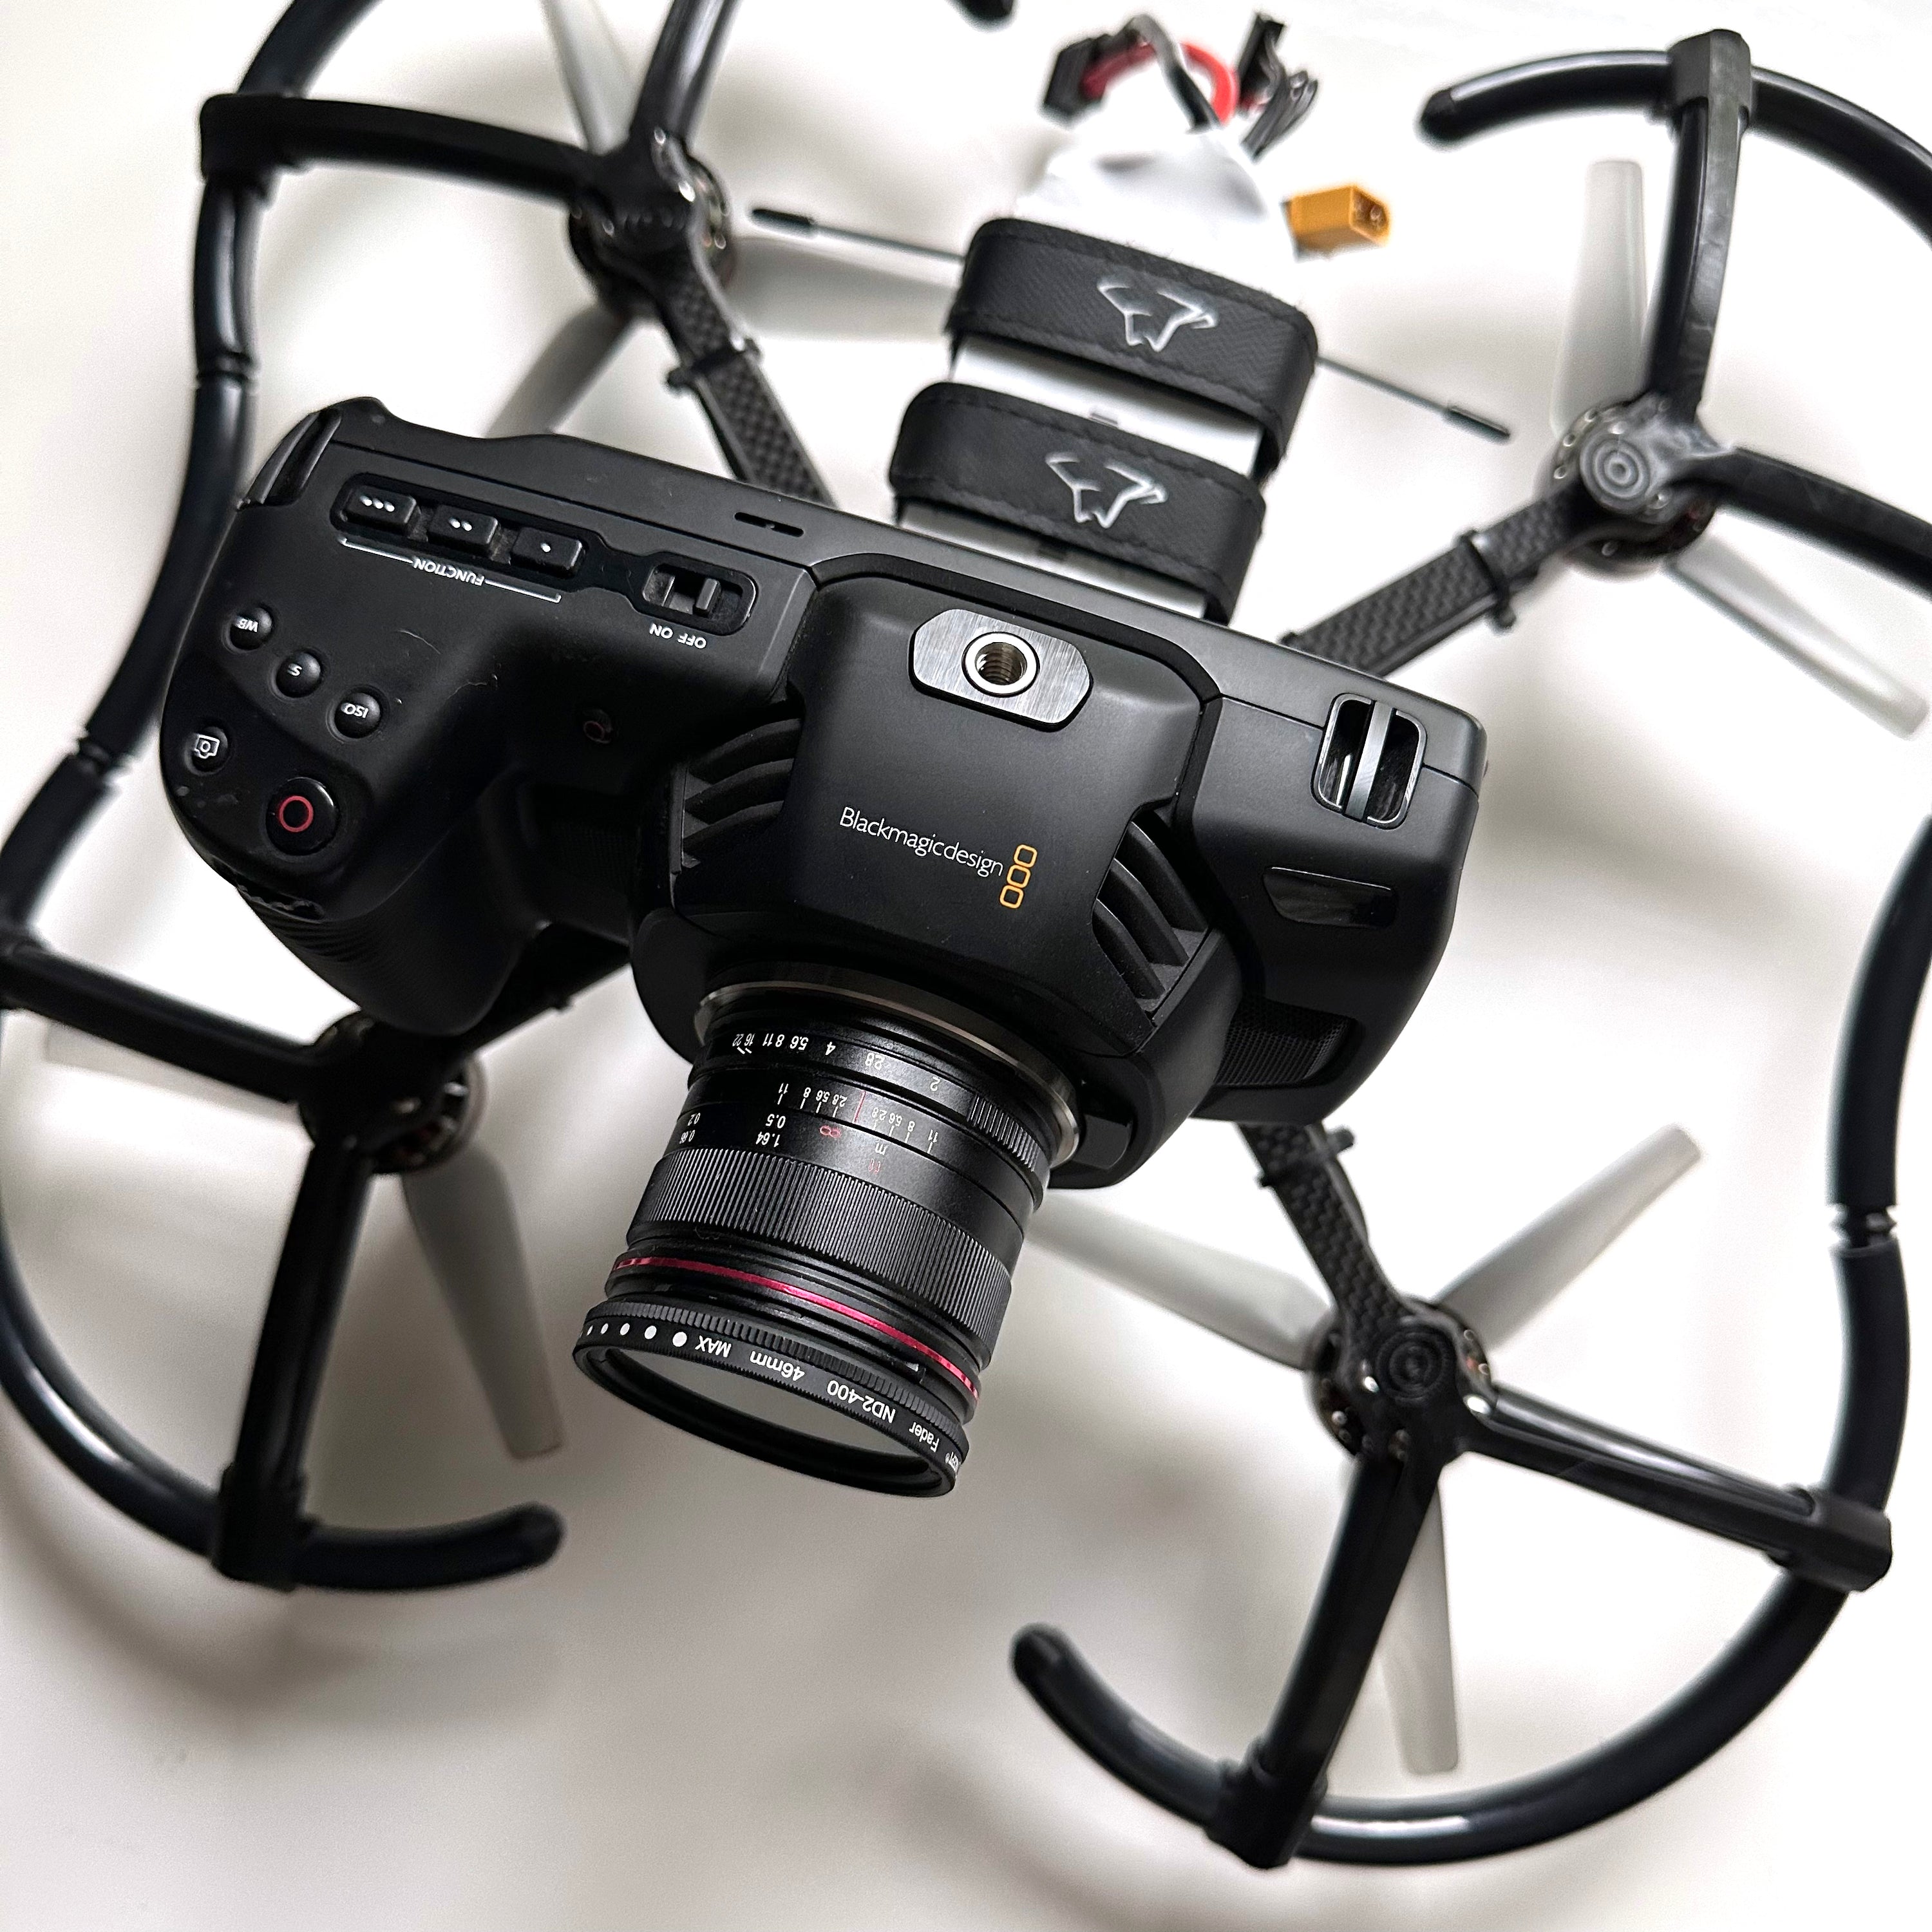 Benton Drones Bentonville Based Drone Pilot with Fancy Camera to capture 4k Cinematic Extreme Sports Video